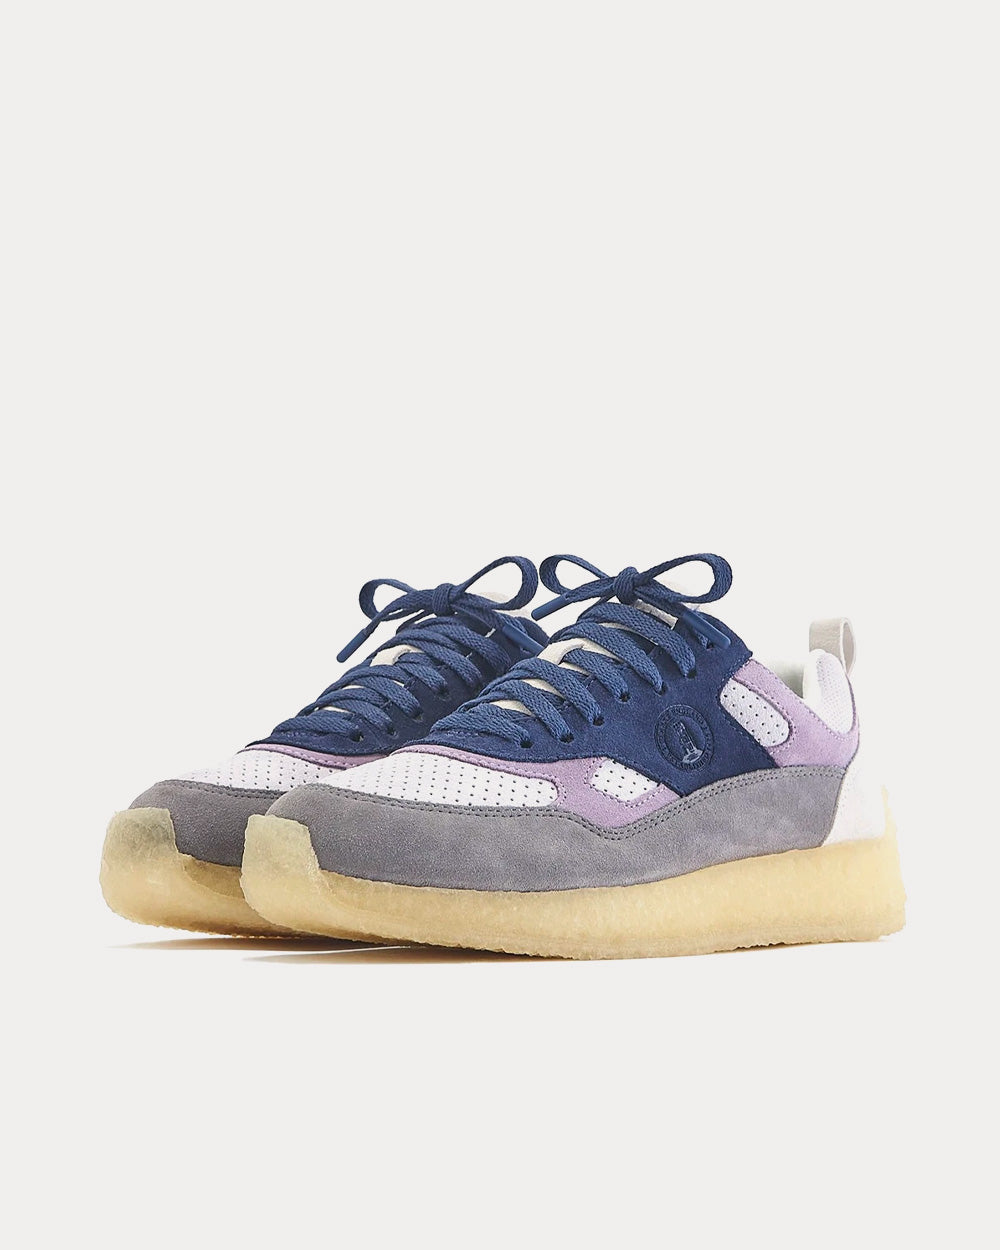 Clarks x Kith - Lockhill Suede Purple Low Top Sneakers